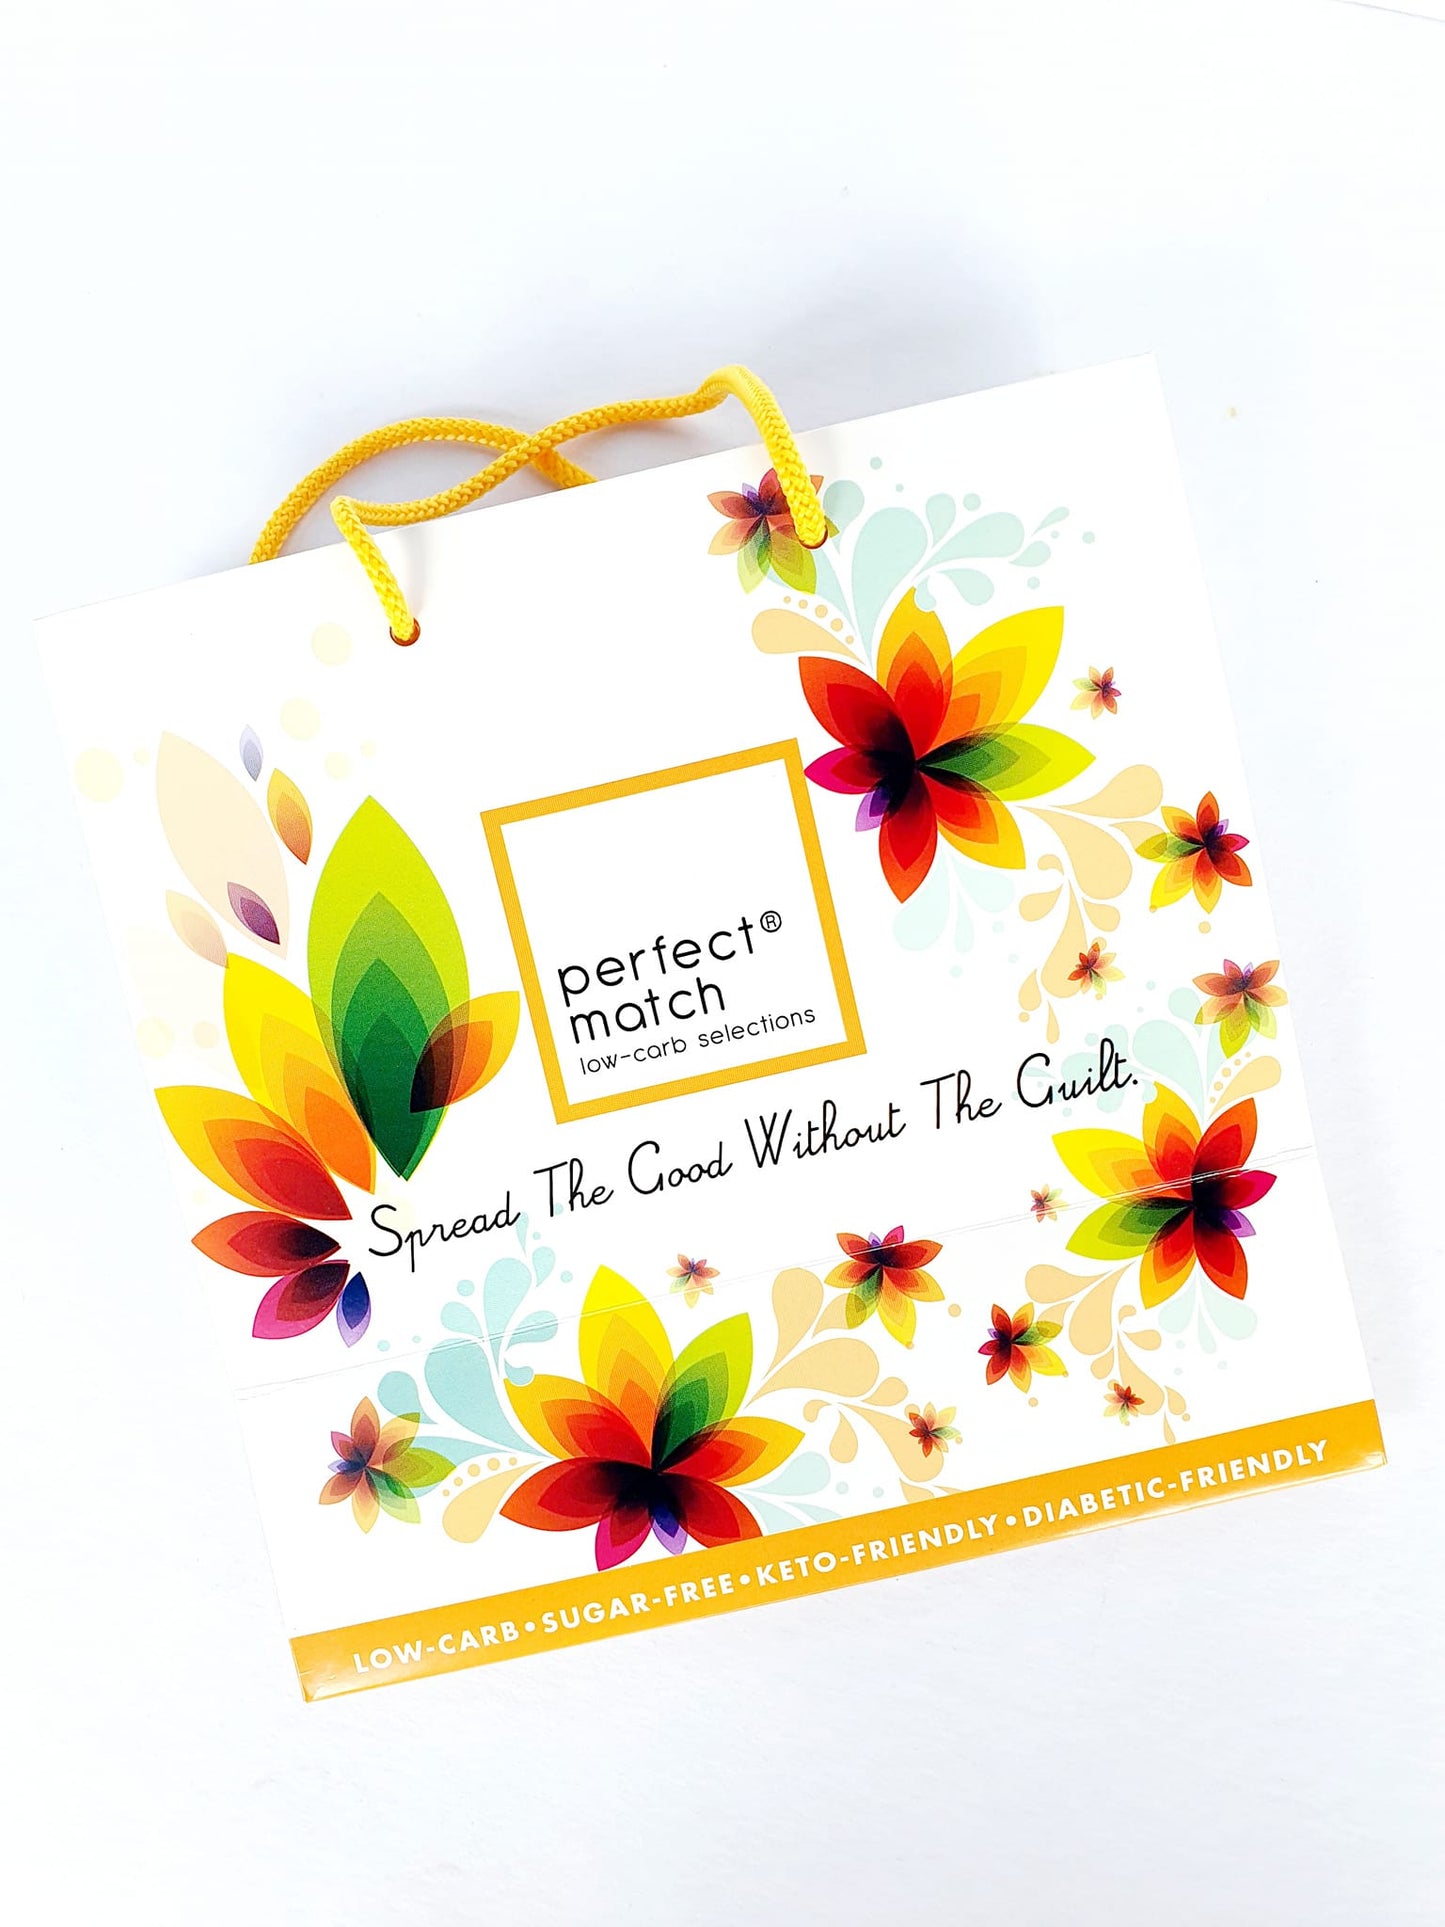 PerfectMatch Low-carb l Colorful Keto Gift Bag and Gift Card